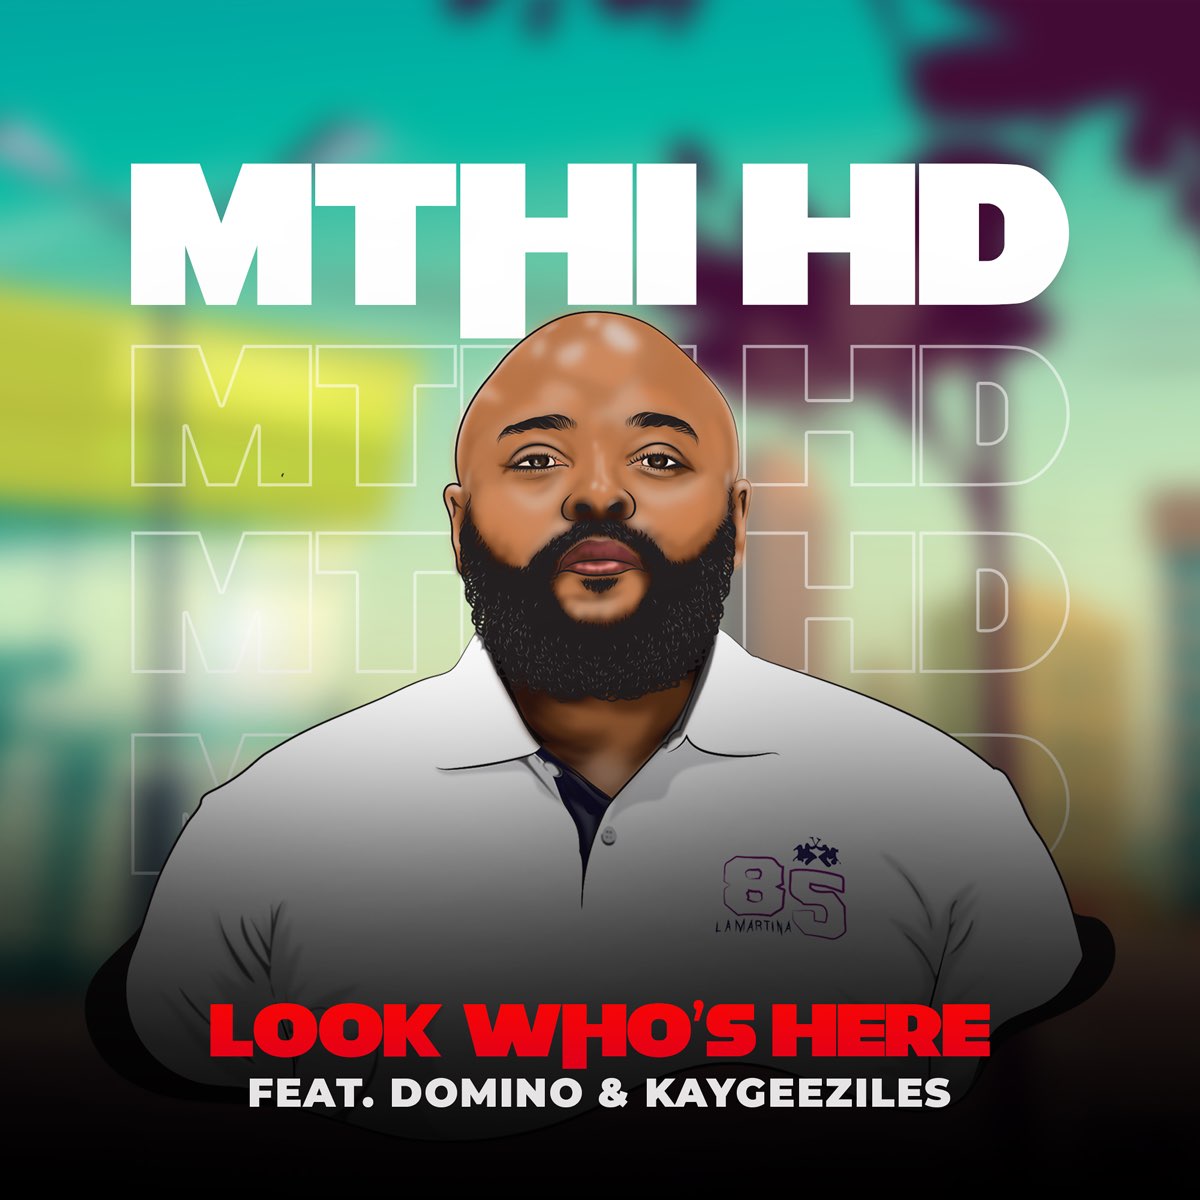 Apple Music 上的MTHI HD《Look Who's Here (feat. Domino) - EP》